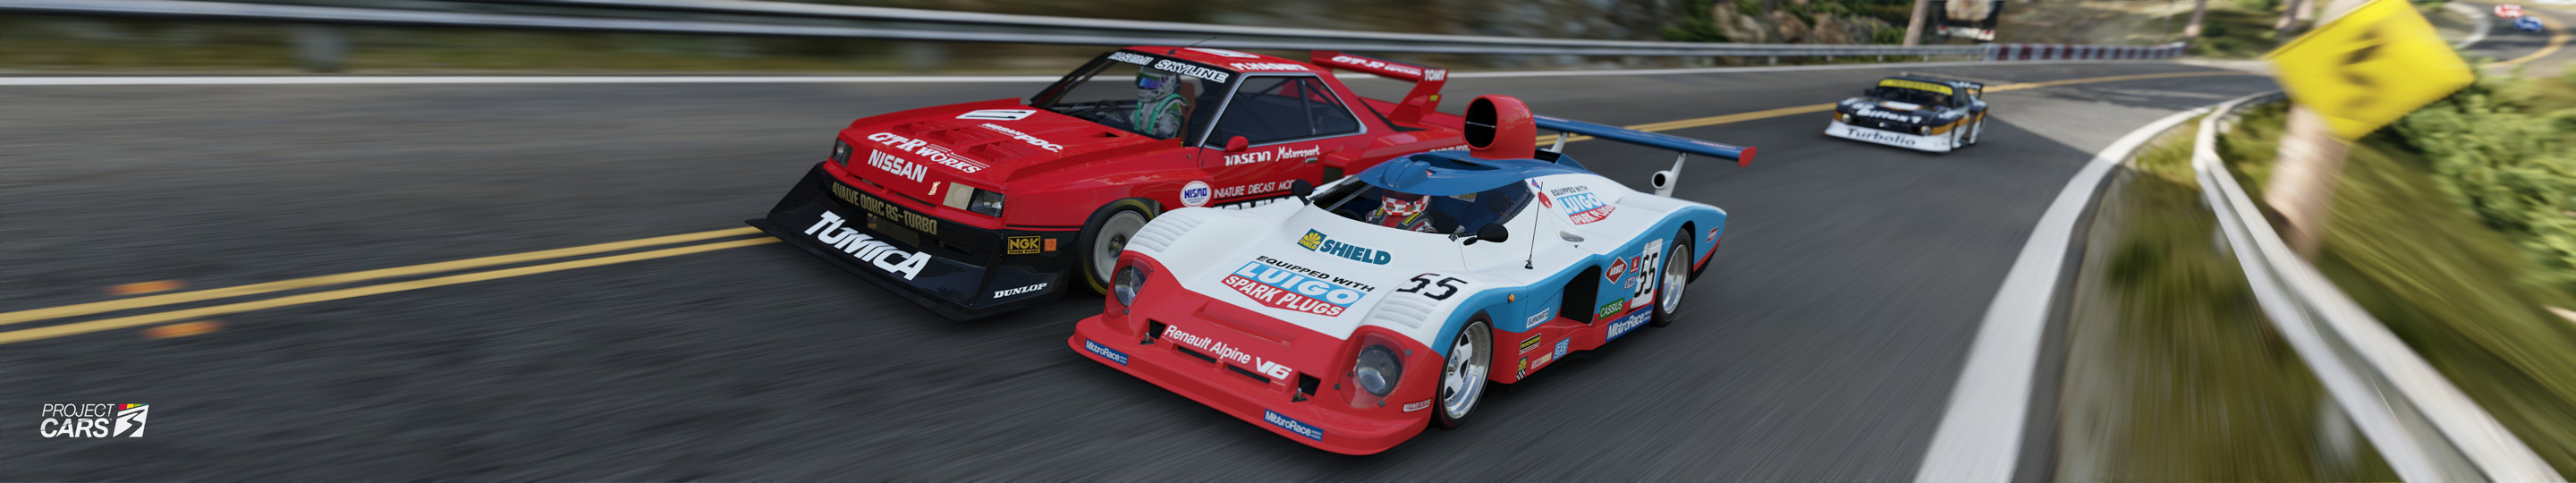 3 PROJECT CARS 3 ALPINE A442B at CALI HIGHWAY REVERSE copy.jpg